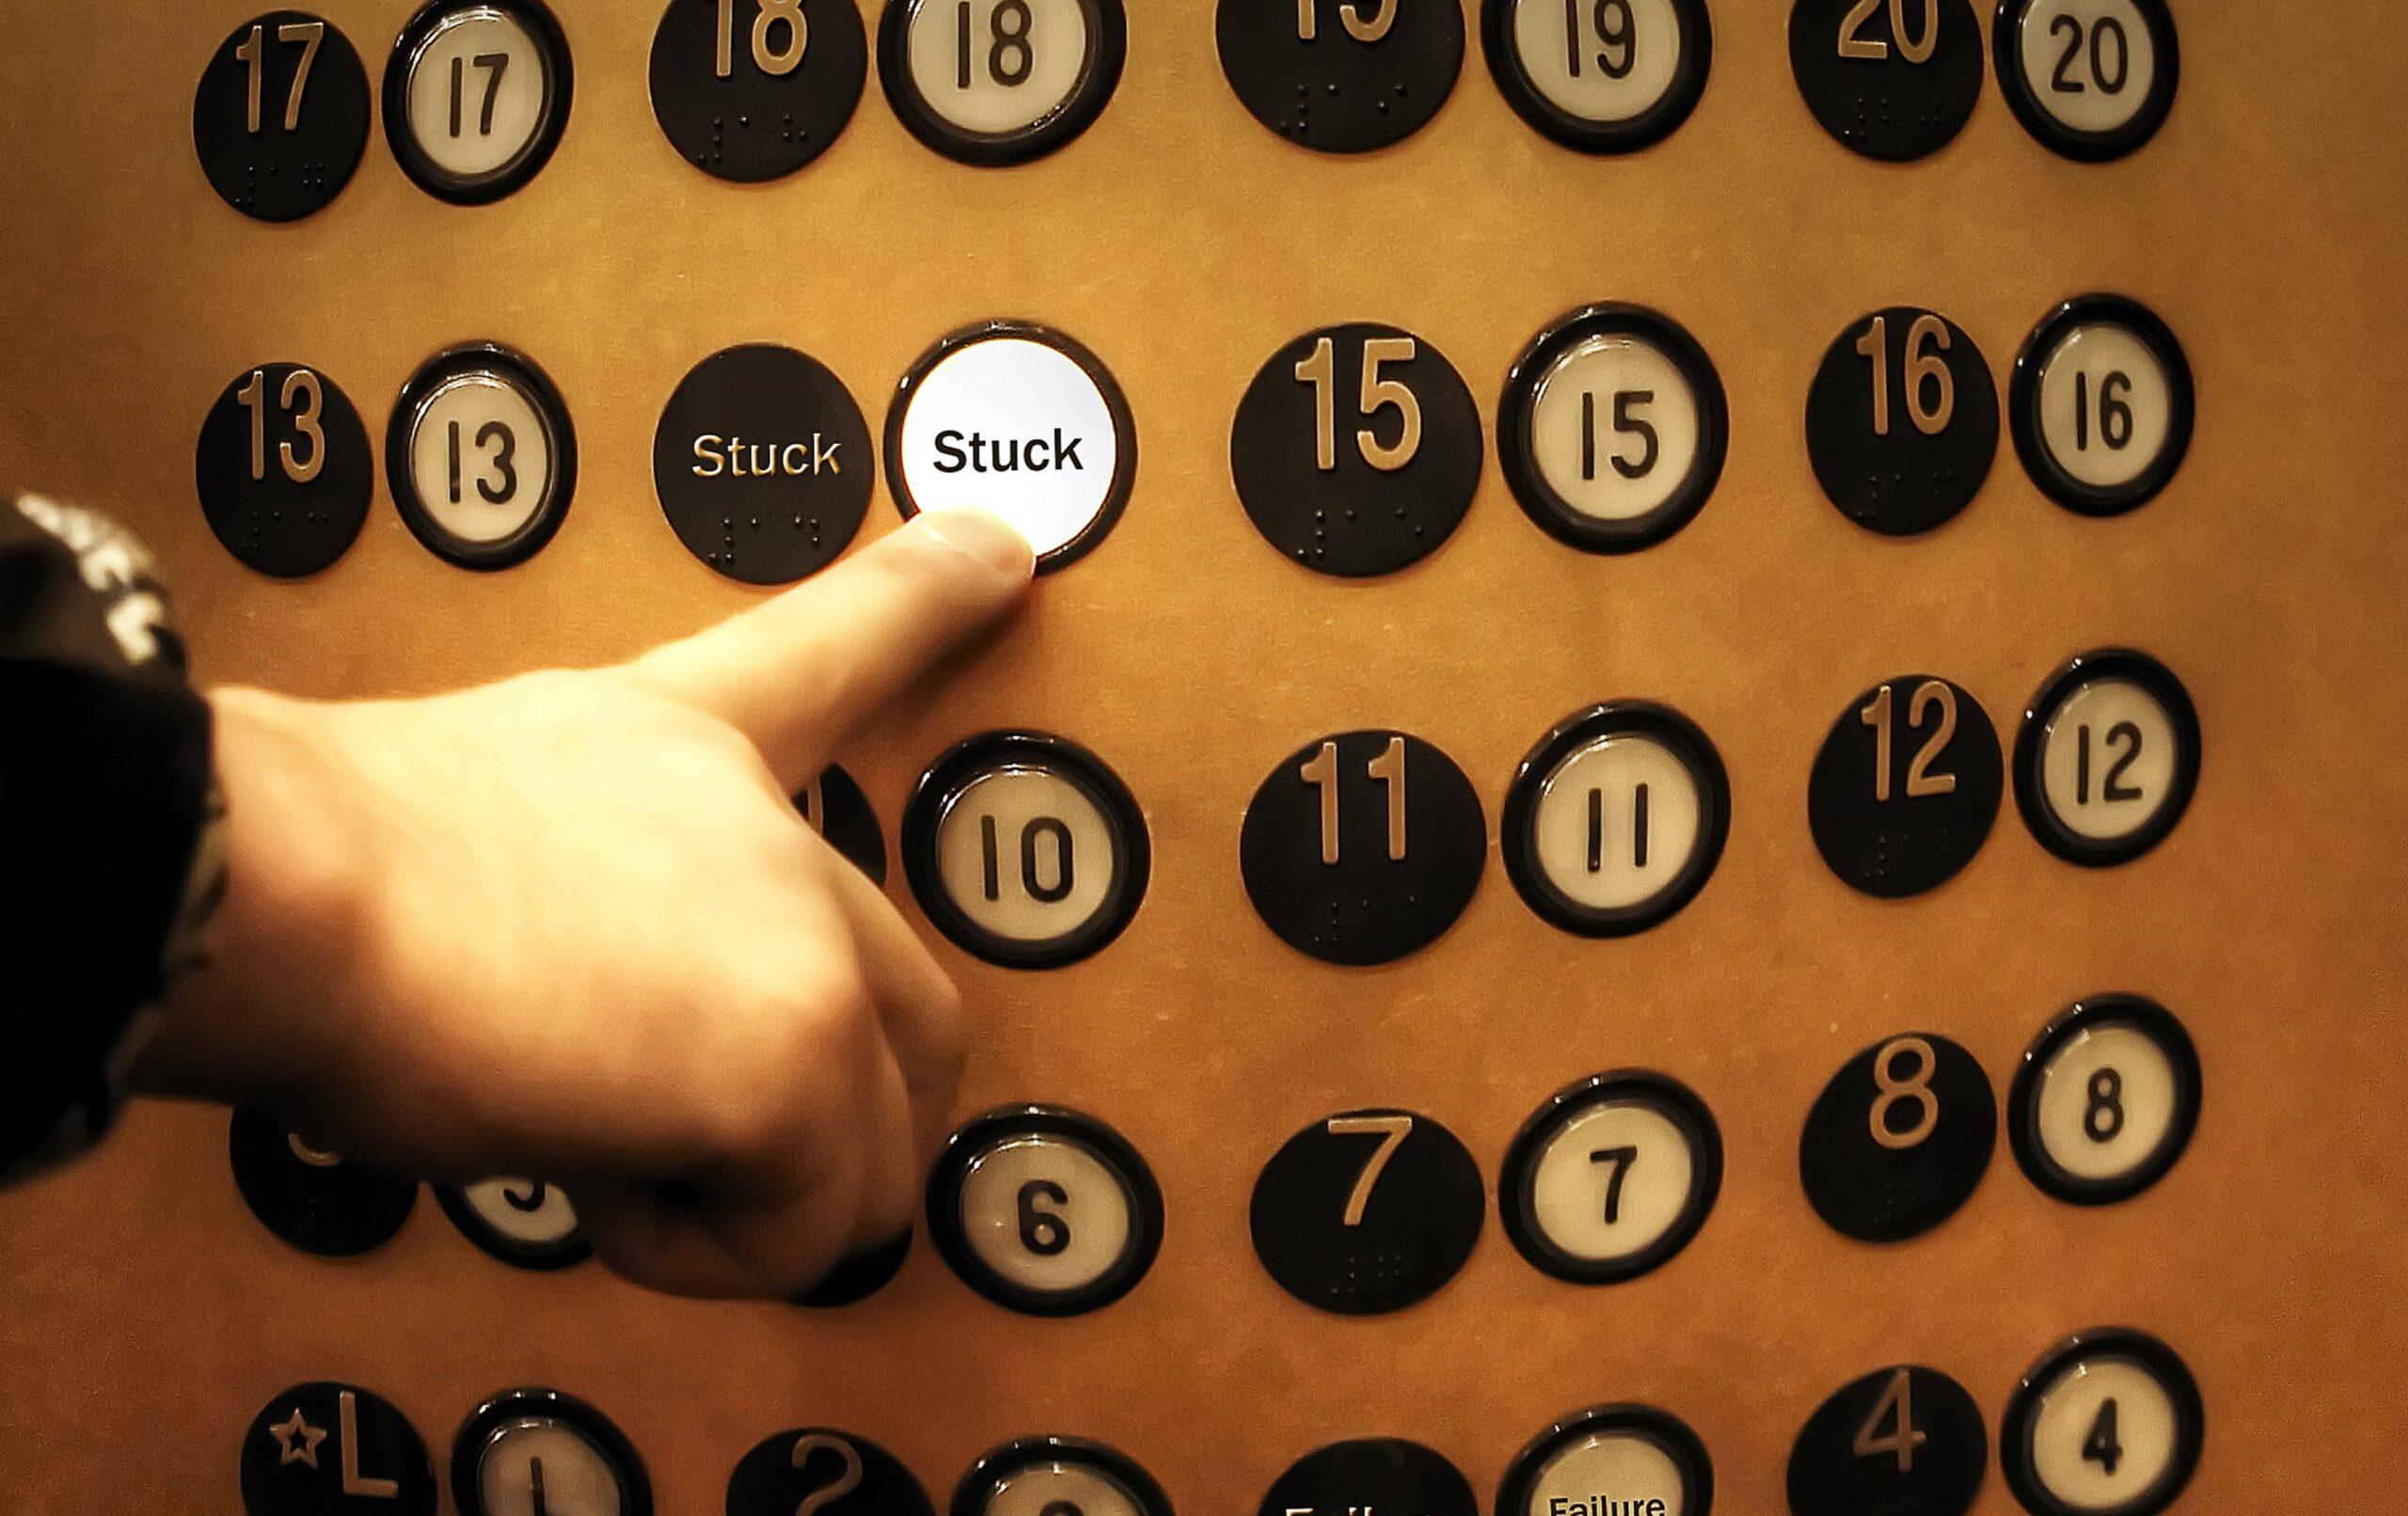 A hand selects "Stuck" on a set of elevator buttons